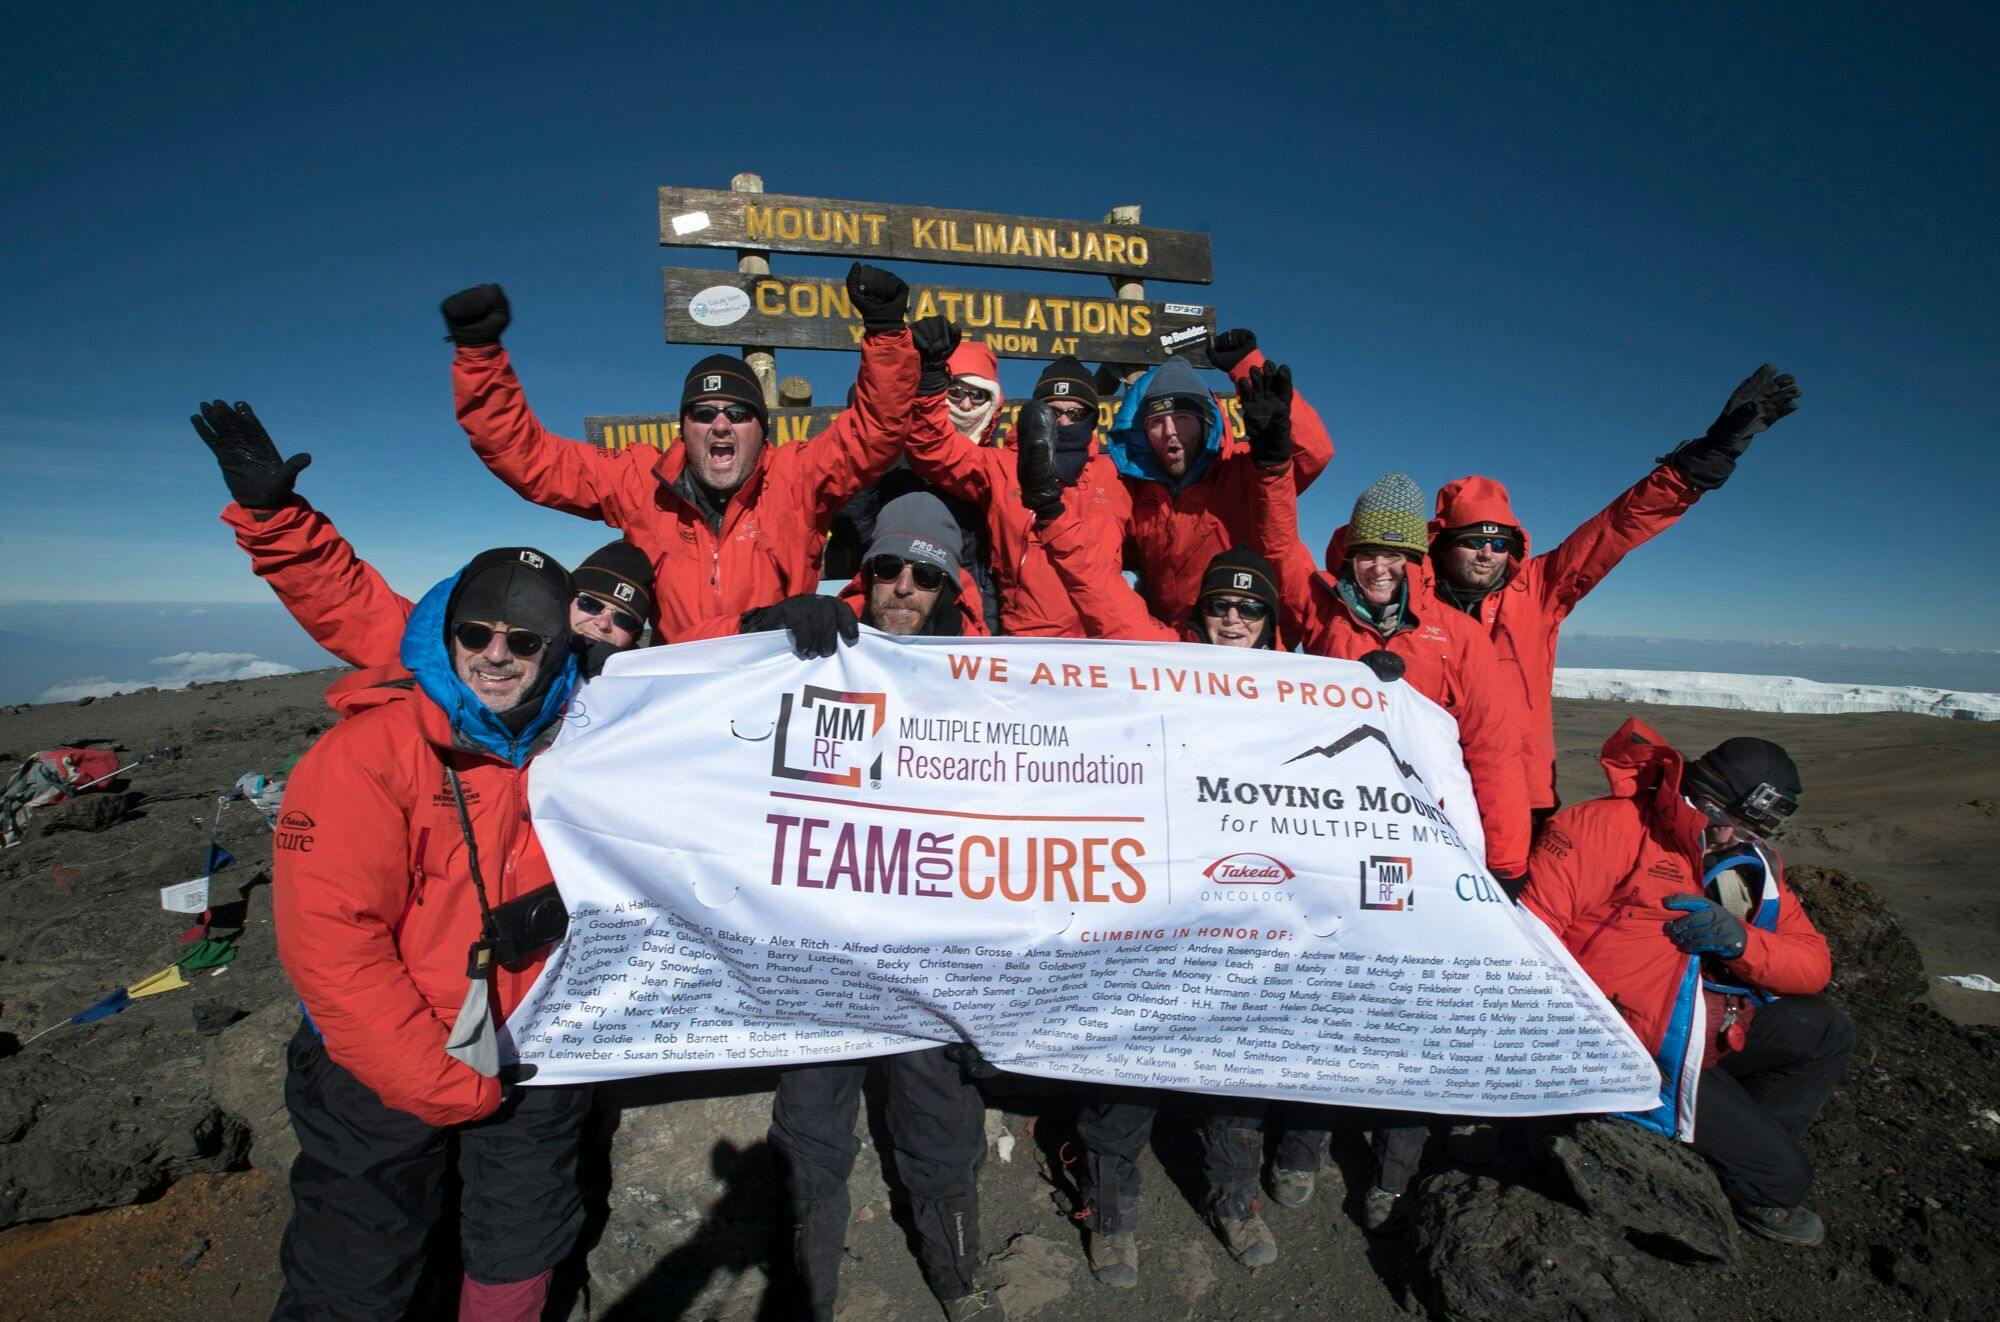 Patients Living with Multiple Myeloma Will Climb Mount Kilimanjaro to Raise Funds and Awareness for Cancer Research